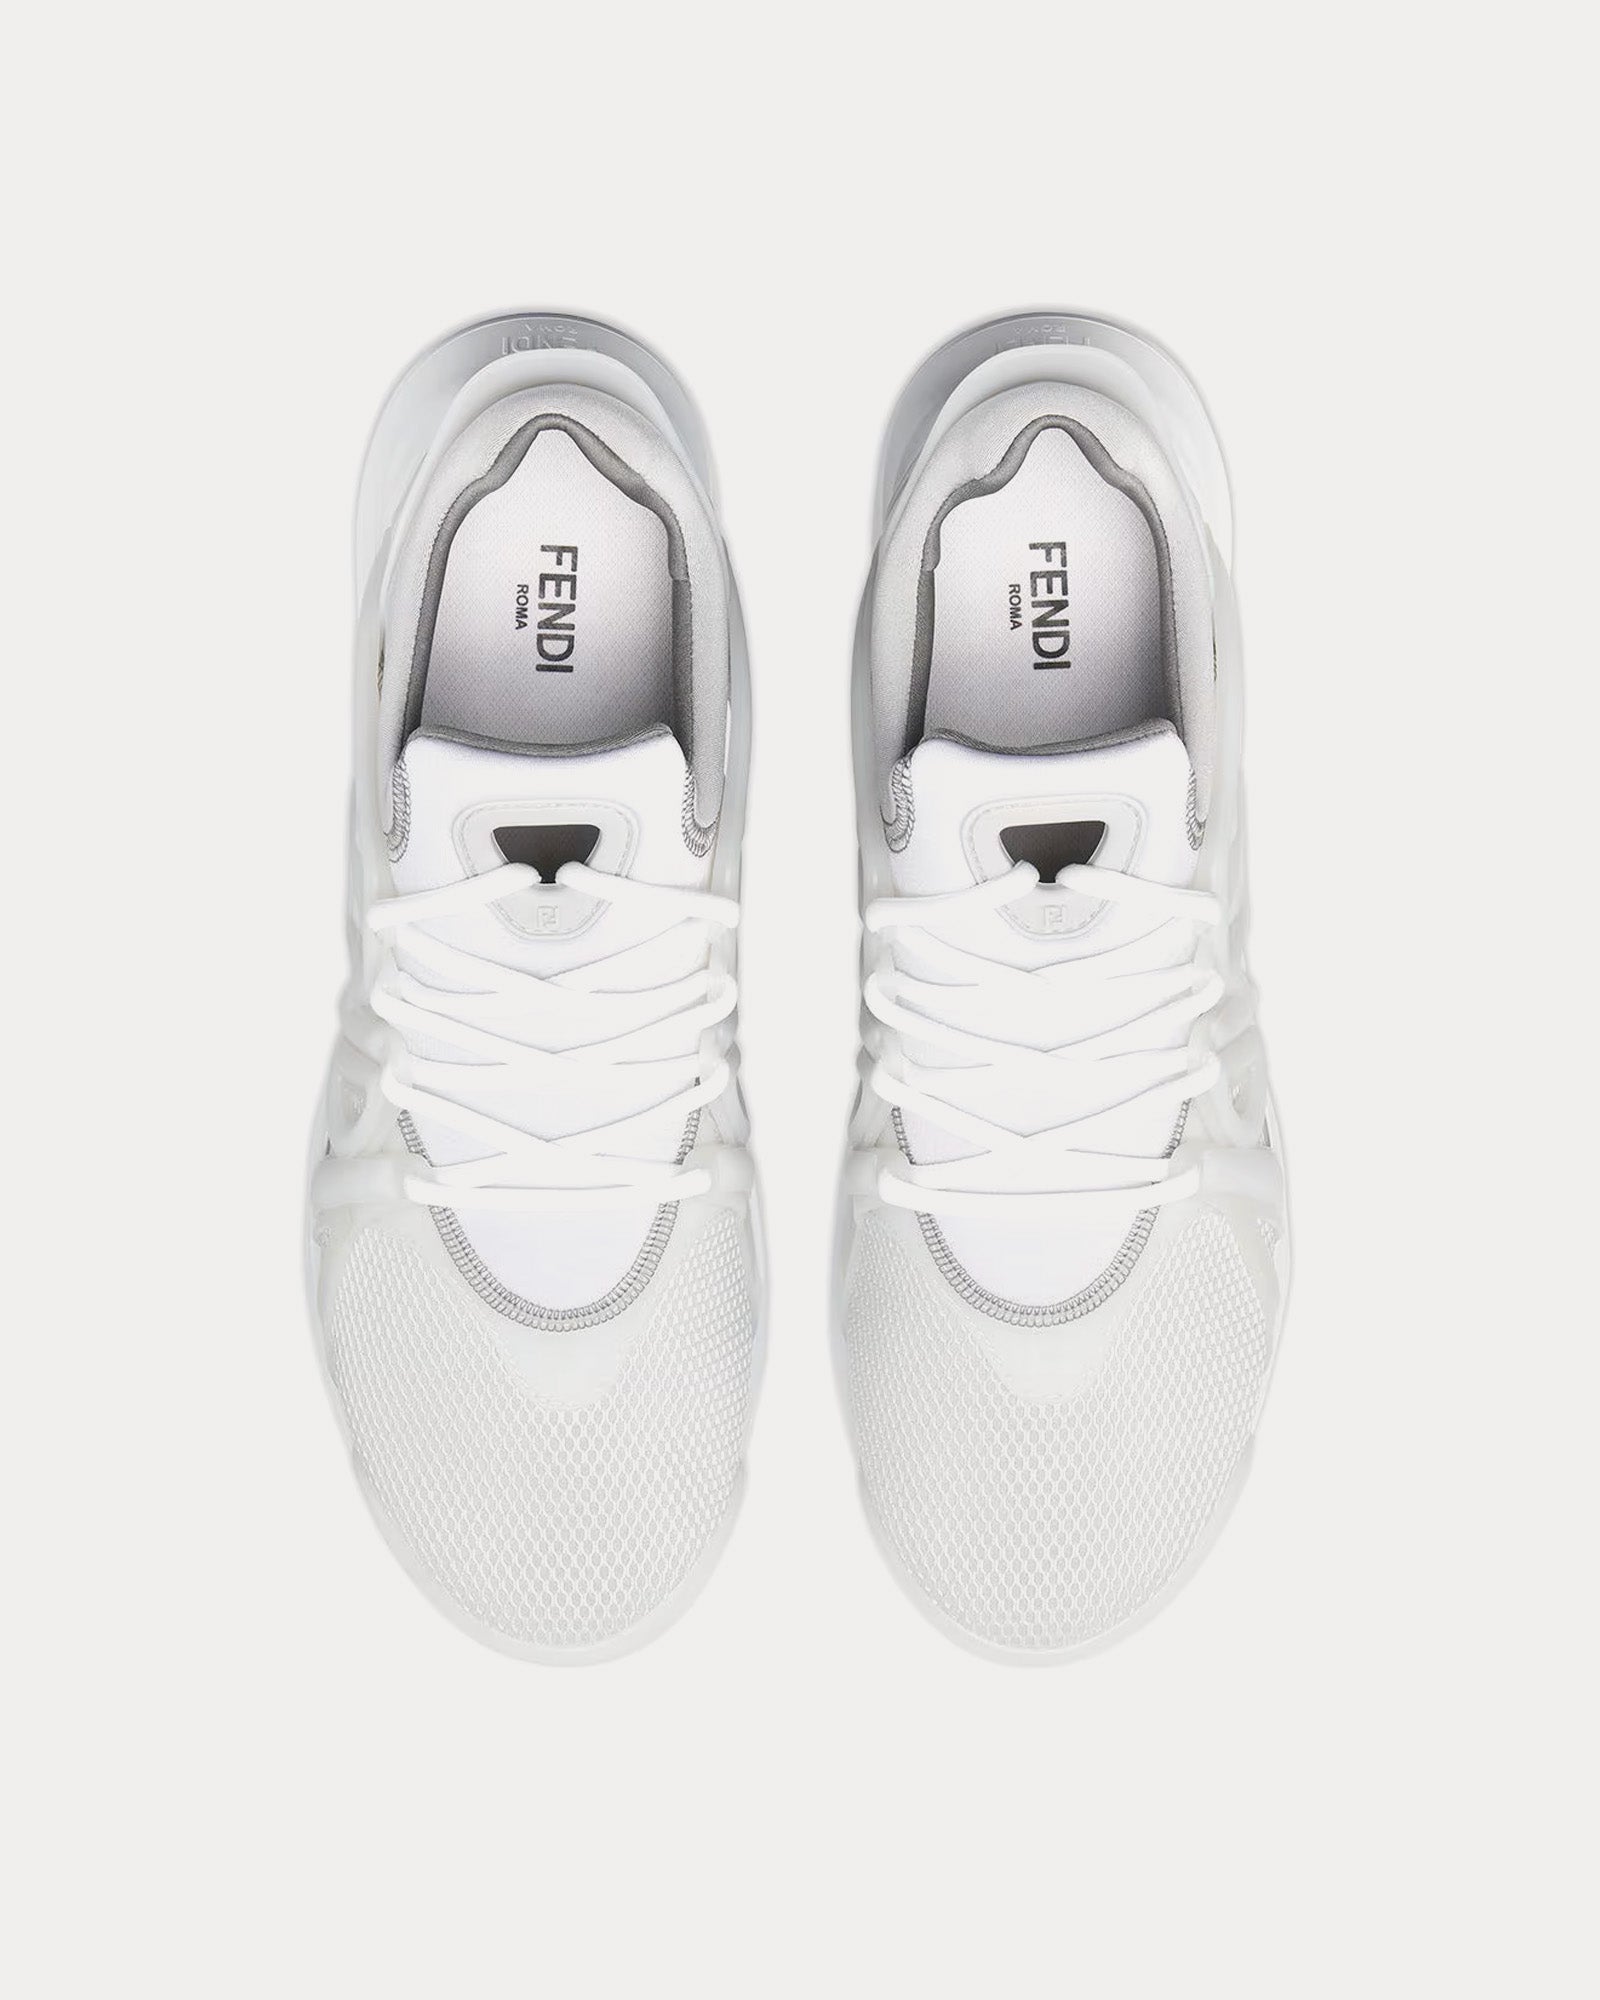 Fendi - Tag Technical Mesh White Low Top Sneakers